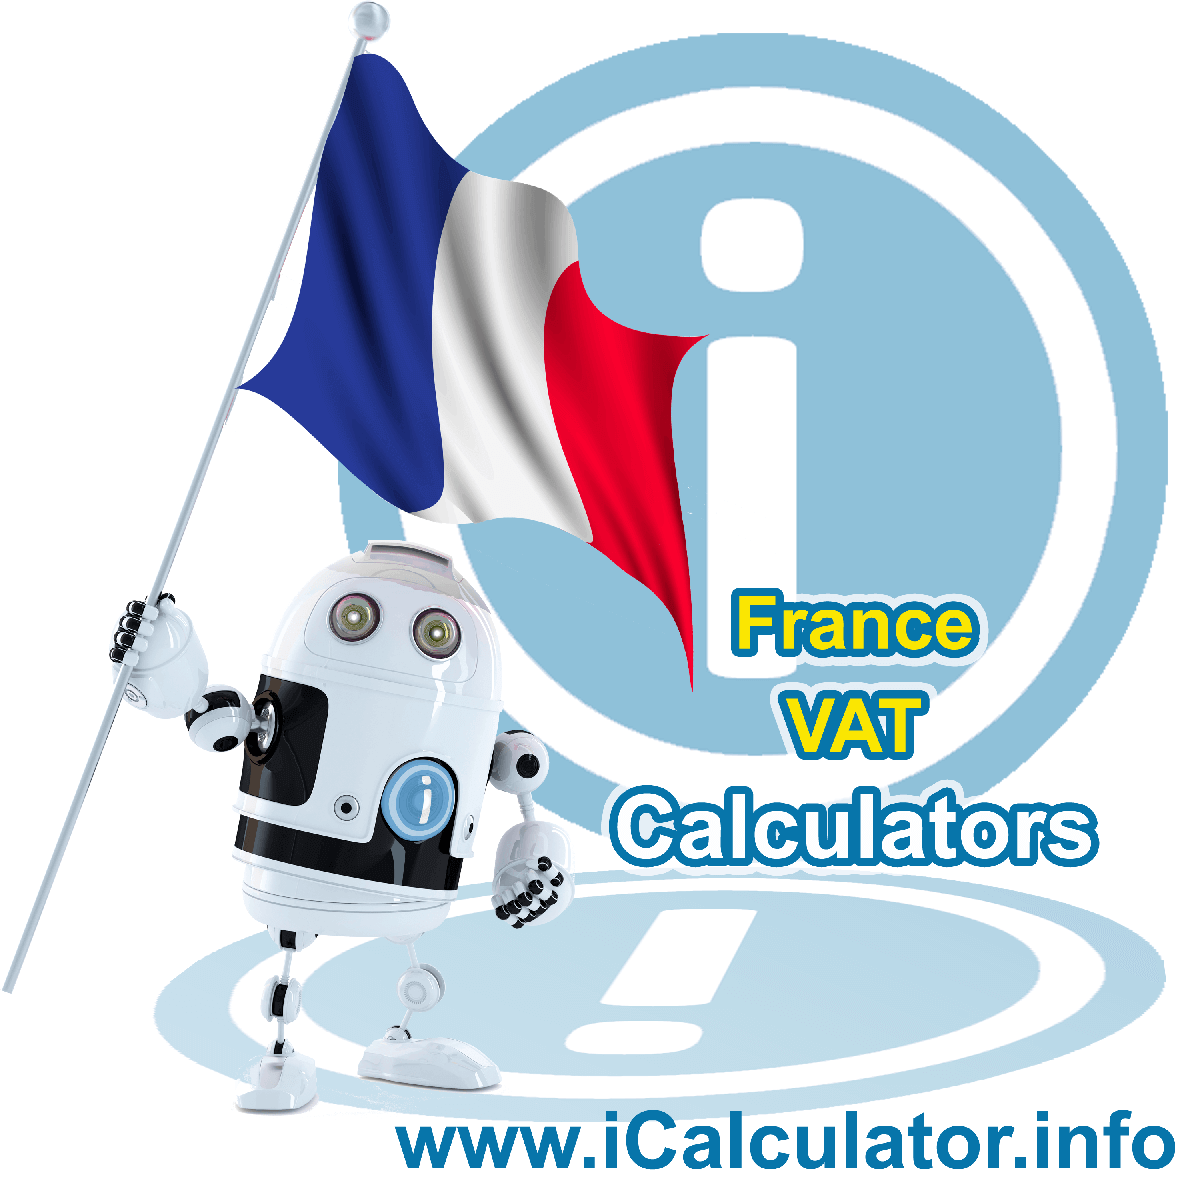 France VAT Calculator. This image shows the France flag and information relating to the VAT formula used for calculating Value Added Tax in France using the France VAT Calculator in 2023